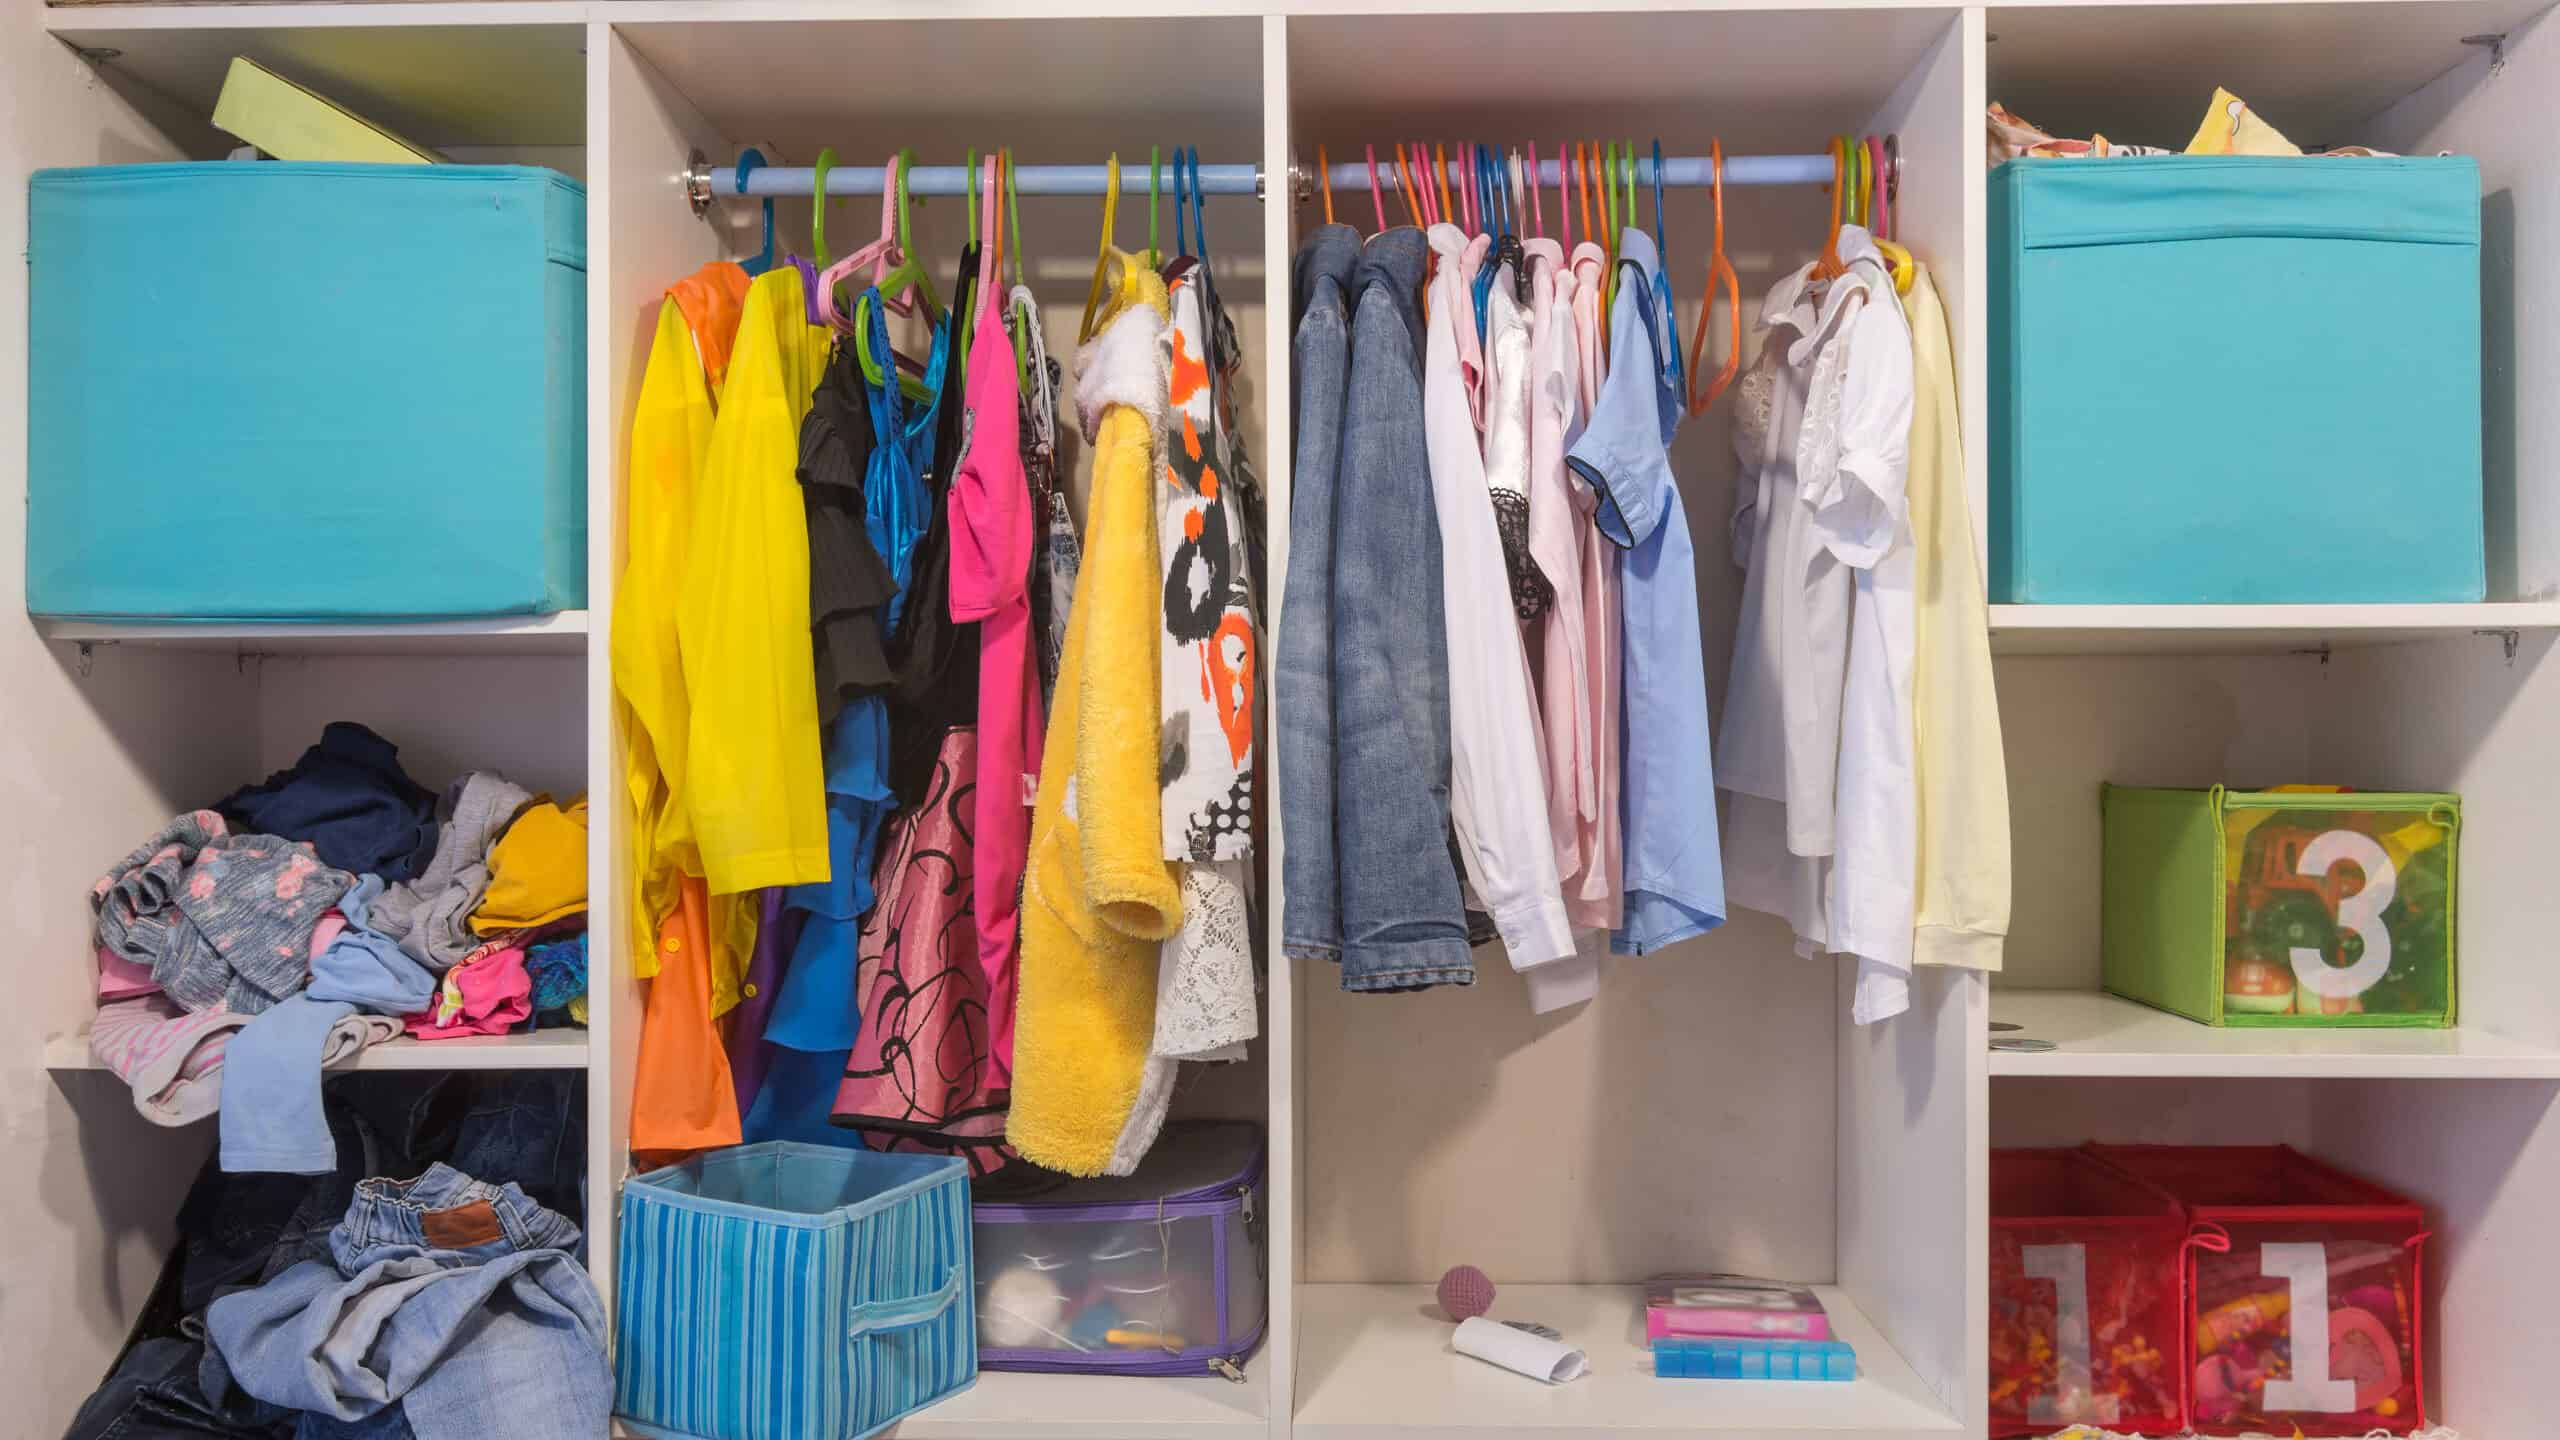 Full frame photo of a child’s open white wood wardrobe. On the left side of the wardrobe is a aqua blue fabric cube in the top shelf below it is a shelf it looks like clothes have just been shoved in it from a laundry basket. Those clothes appear to be mostly shirts. The shirts are blue yellow pink and one that is gray and pink. In the queue below the shirts are three pairs of blue jeans visible that look like they’ve kind of just been haphazardly put away as well there is something below the jeans but it is not visible in the photograph. To the right of those shelves is a large rectangular cube with a rod. There are 13 hangers on the rod. The hangers are blue pink green orange and yellow. The clothes in the left cube look like costumes in this particular Though there may be a kid-sized cocktail dress, but it’s more likely a princess costume. There is a terry cloth robe, too, but that may in fact be a “The Dude” costume. On the shelf beneath the rod is a blue fabric cube with a handle it appears to be empty though there may be things lower down in it behind the fabric cube is a mesh cube with a purple rim that has some thing indiscernible in it In the cube to the right of that cube there are 20 or so hangers upon which regular looking clothing is hanging, primarily shirts and a couple of jackets. The jackets are grayish powder blue. A long sleeve white shirt hangs to the right of the jackets. a short sleeve pink shirt hangs next to the white shirt. There are a indiscernible pieces of clothing between the short sleeve pink shirt and then a short sleeve blue shirt. Directly to the right of the blue shirt is an empty orange hanger. To its right is a short sleeve white blouse and then another short sleeve white blouse and then an empty yellow hanger and then a yellow blouse. On the shelf underneath the clothes are some indiscernible objects- possibly books and maybe a ball. In frame right are three shelves the top shelf has an aqua fabric cube with some things sticking out that are in describable below that is a mesh front cube with a three stenciled onto it. It is green and seems to have toys in it below that are two red mesh cubes that have the number one stenciled on each of them. Not sure what they contain. There is some cloth in front of them on the shelf. In the bottom half of the frame is actually another lower shelf and rods, but it is out of the frame for the most part.